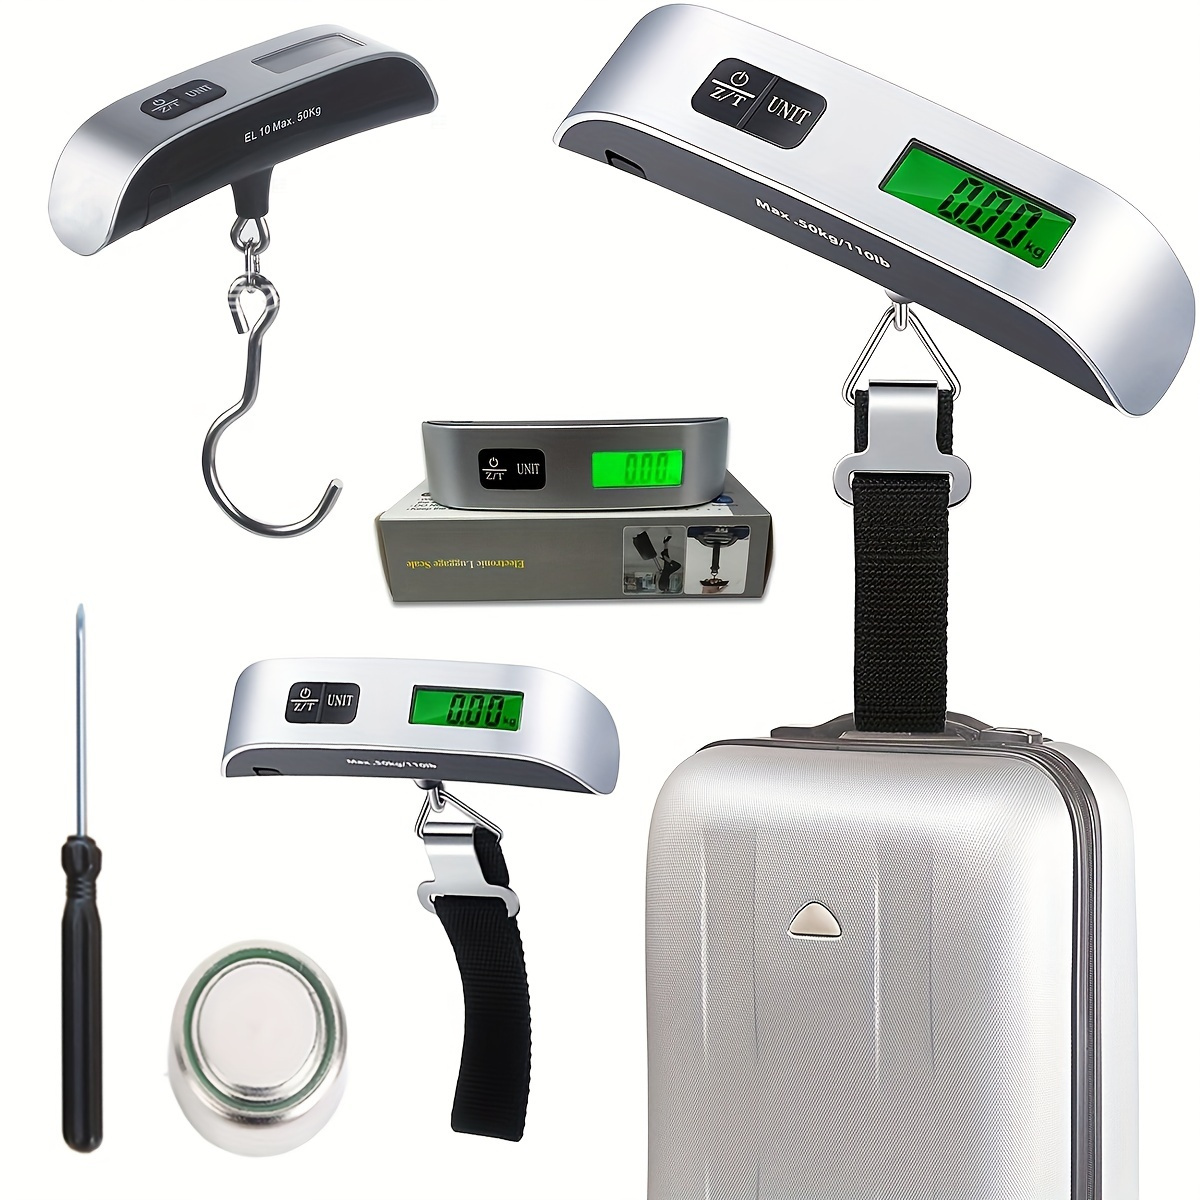 https://img.kwcdn.com/product/luggage-scale/d69d2f15w98k18-d2704bd8/temu-avi/image-crop/3b091326-a9d4-4a35-b25d-6d94306b06d4.jpg